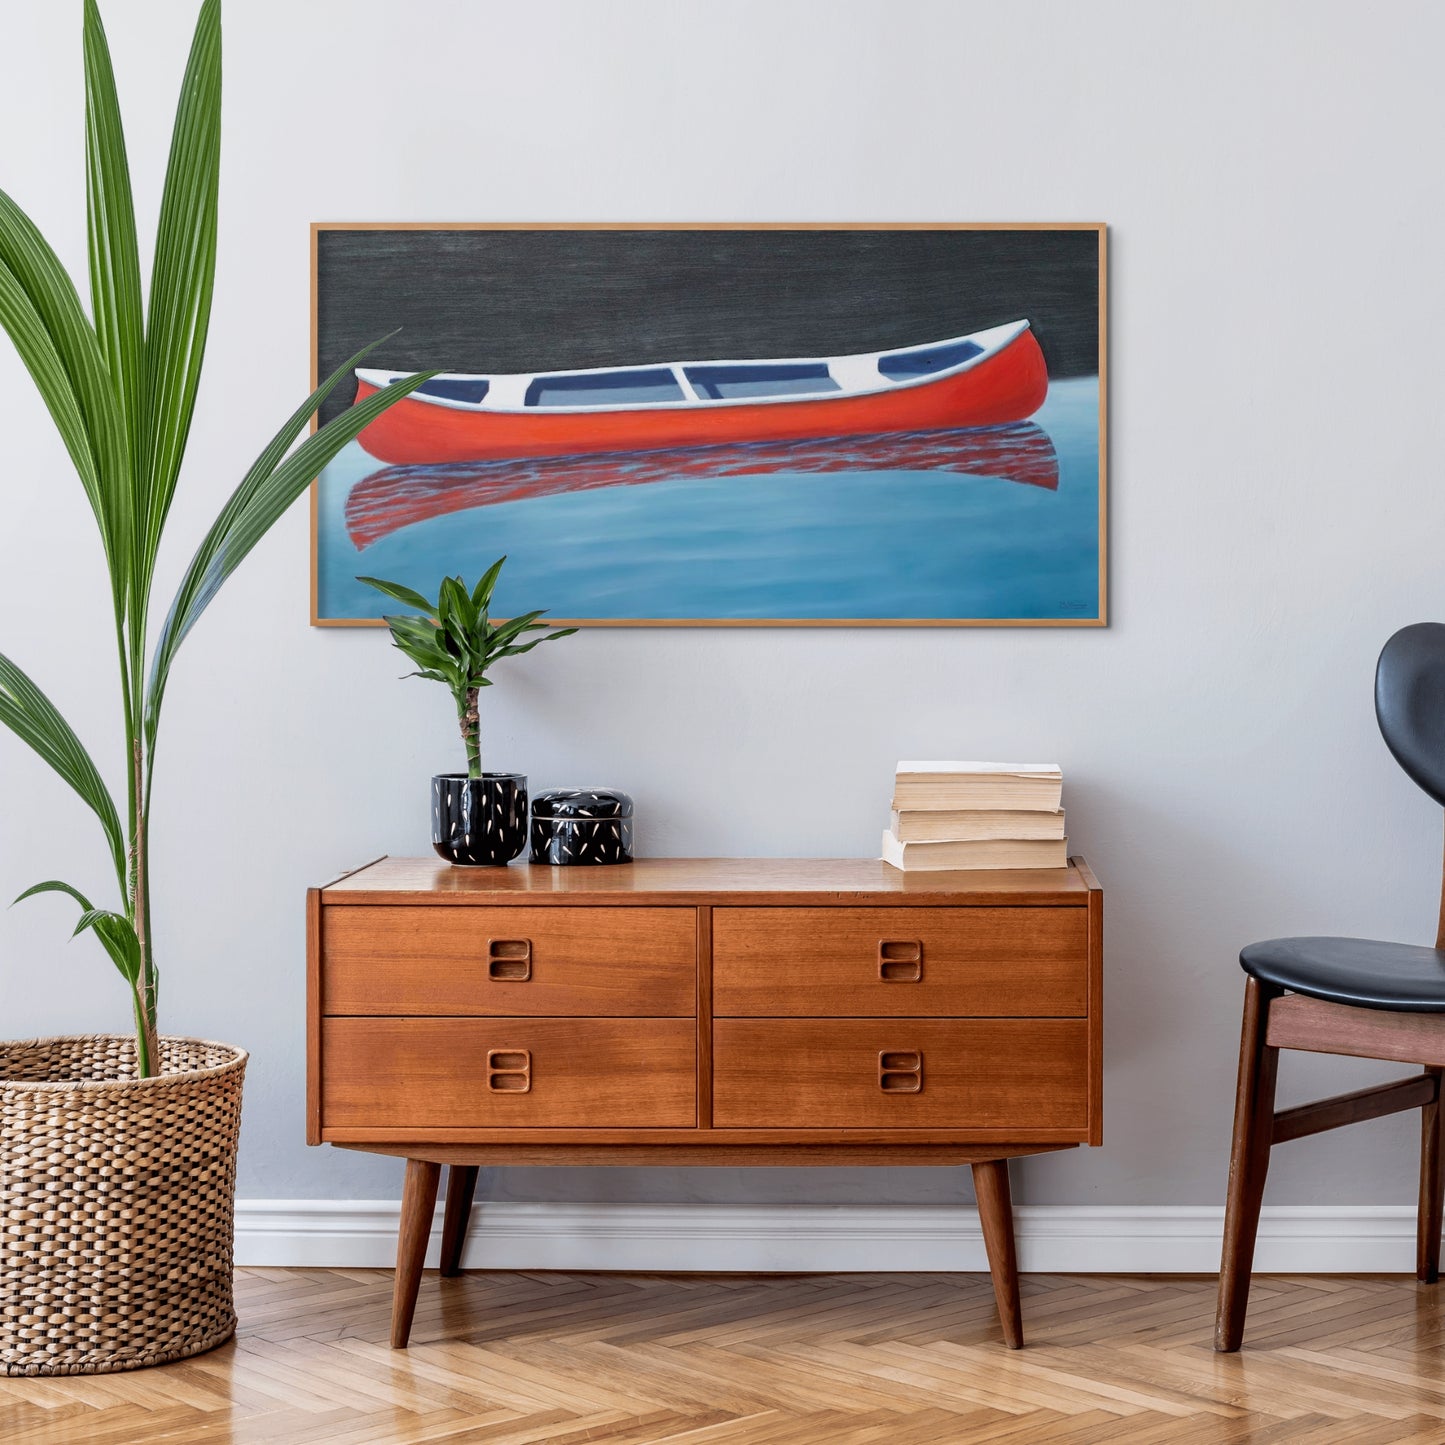 Canoe painting of a small red boat by Canadian artist Catherine McKinnon. The red canoe is floating on almost still blue water in the foreground and the background is pitch black. The giclee print is framed in cherry wood. It is mounted on a light gray wall above a mid-century modern cherry wood sideboard.